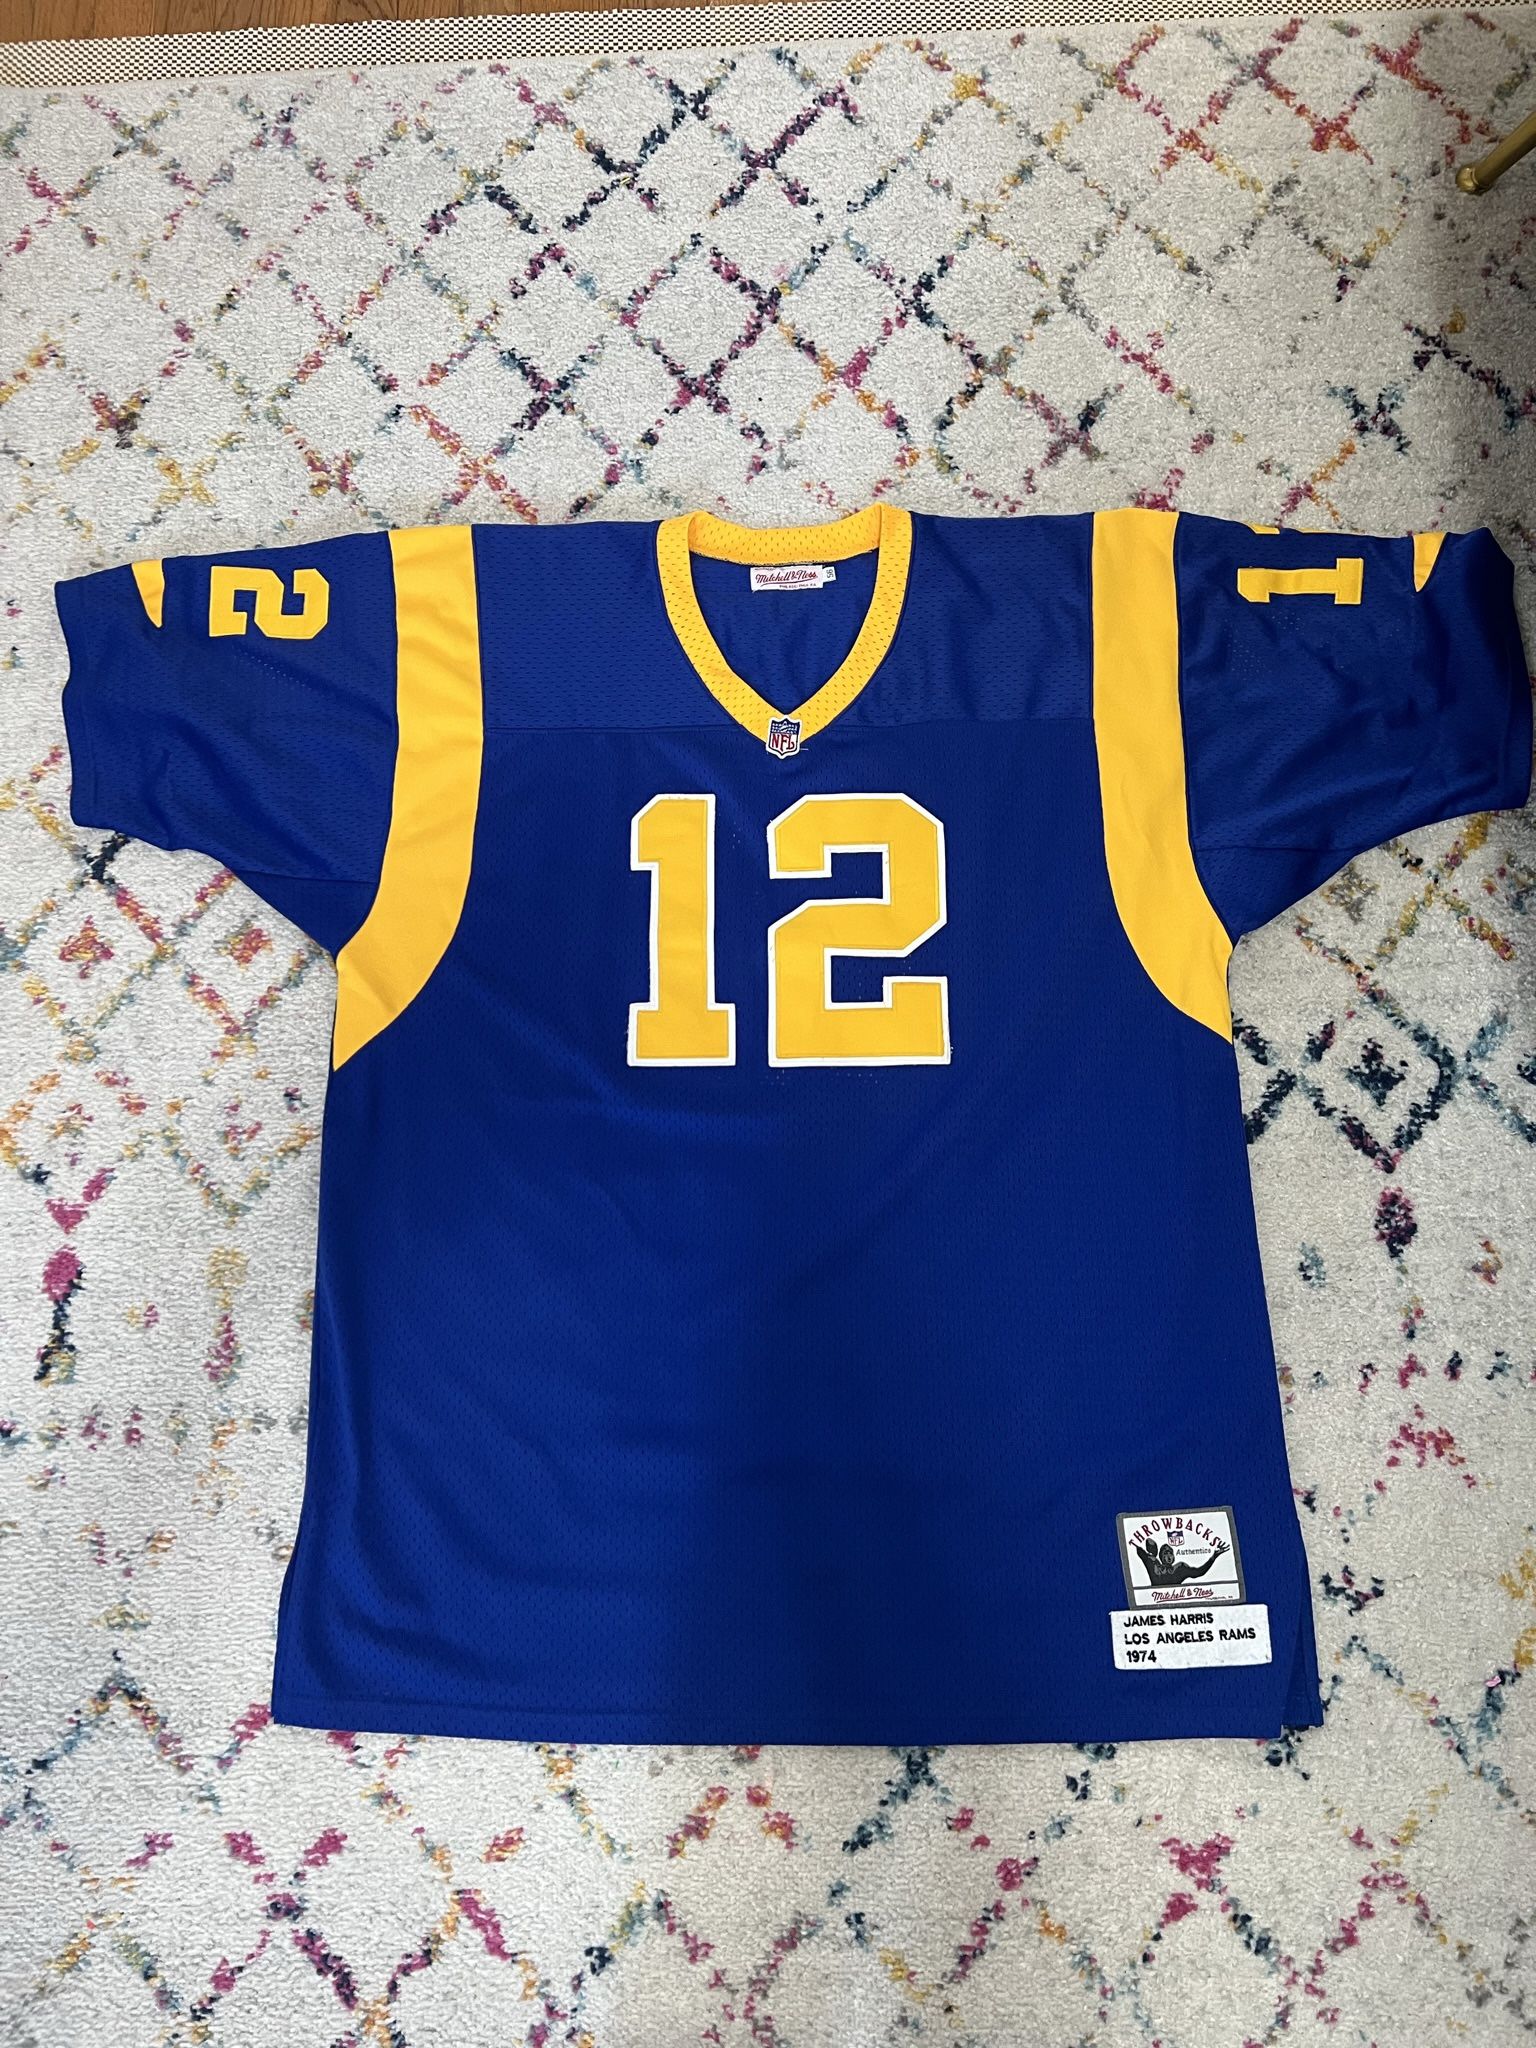 Mitchell & Ness Los Ángeles Rams; James Harris Jersey for Sale in New York,  NY - OfferUp